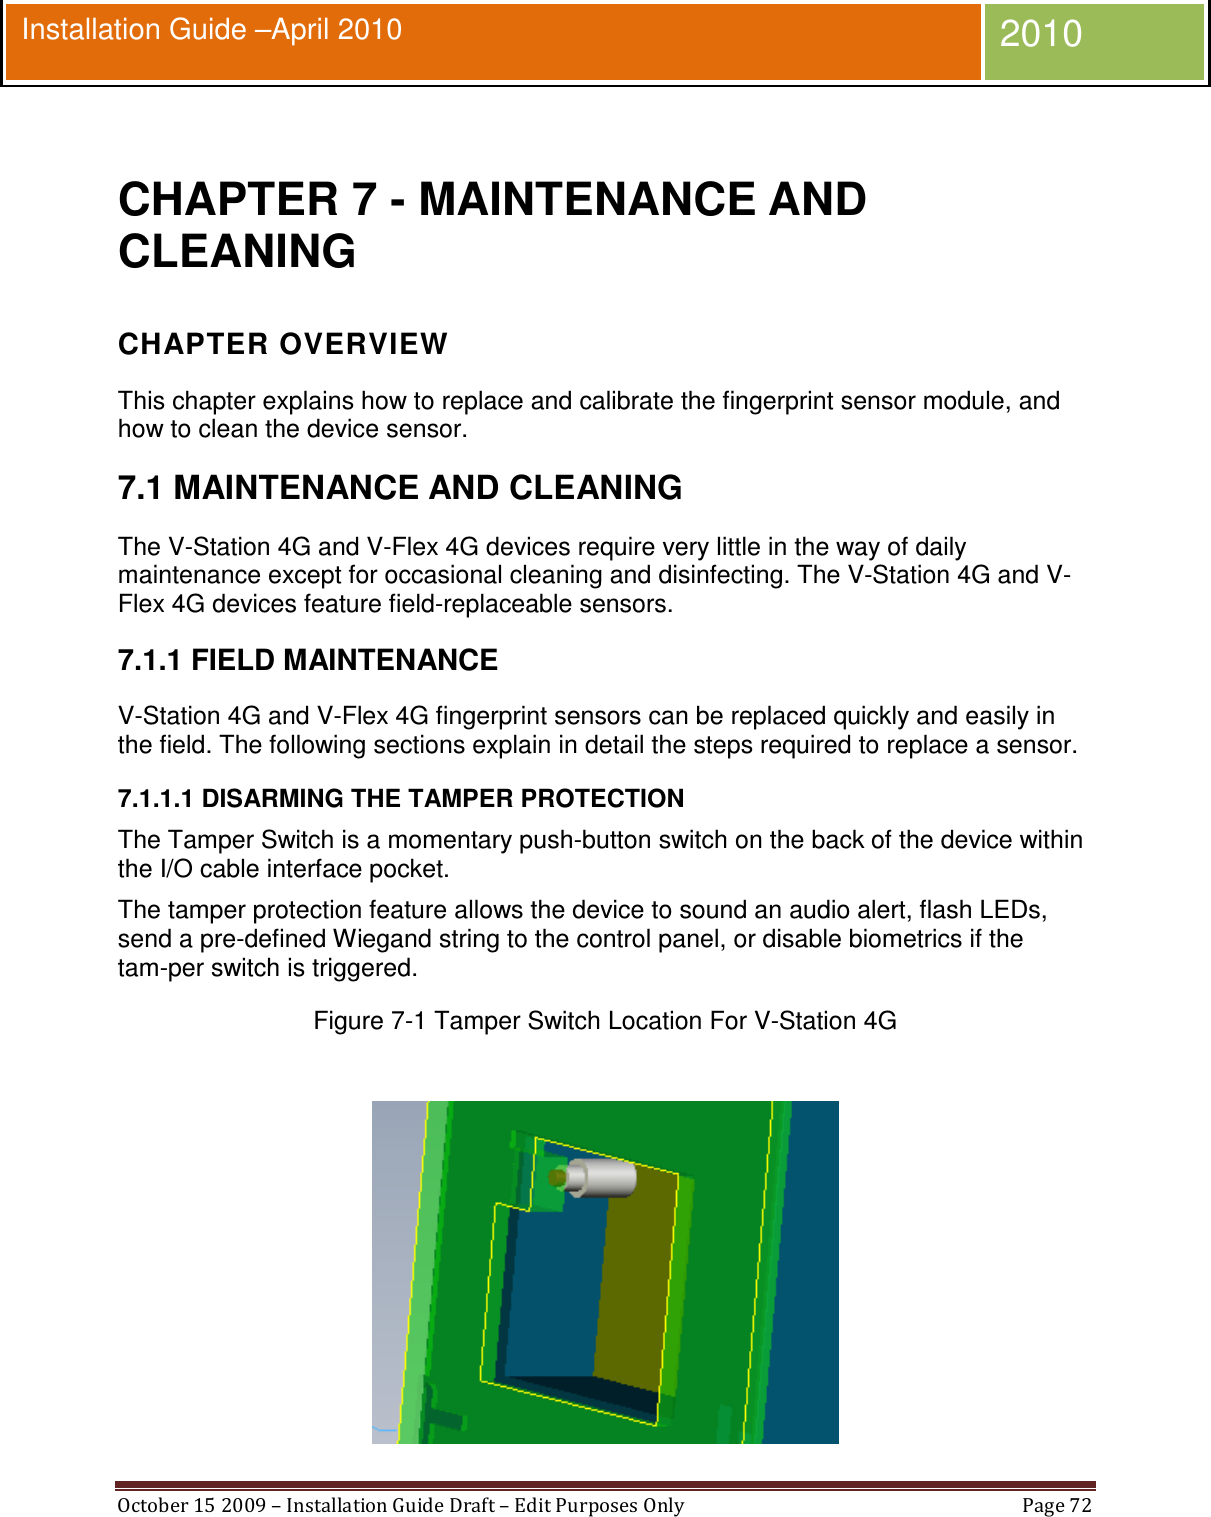  October 15 2009 – Installation Guide Draft – Edit Purposes Only  Page 72  Installation Guide –April 2010 2010  CHAPTER 7 - MAINTENANCE AND CLEANING CHAPTER OVERVIEW This chapter explains how to replace and calibrate the fingerprint sensor module, and how to clean the device sensor. 7.1 MAINTENANCE AND CLEANING The V-Station 4G and V-Flex 4G devices require very little in the way of daily maintenance except for occasional cleaning and disinfecting. The V-Station 4G and V-Flex 4G devices feature field-replaceable sensors. 7.1.1 FIELD MAINTENANCE V-Station 4G and V-Flex 4G fingerprint sensors can be replaced quickly and easily in the field. The following sections explain in detail the steps required to replace a sensor. 7.1.1.1 DISARMING THE TAMPER PROTECTION The Tamper Switch is a momentary push-button switch on the back of the device within the I/O cable interface pocket. The tamper protection feature allows the device to sound an audio alert, flash LEDs, send a pre-defined Wiegand string to the control panel, or disable biometrics if the tam-per switch is triggered. Figure 7-1 Tamper Switch Location For V-Station 4G   